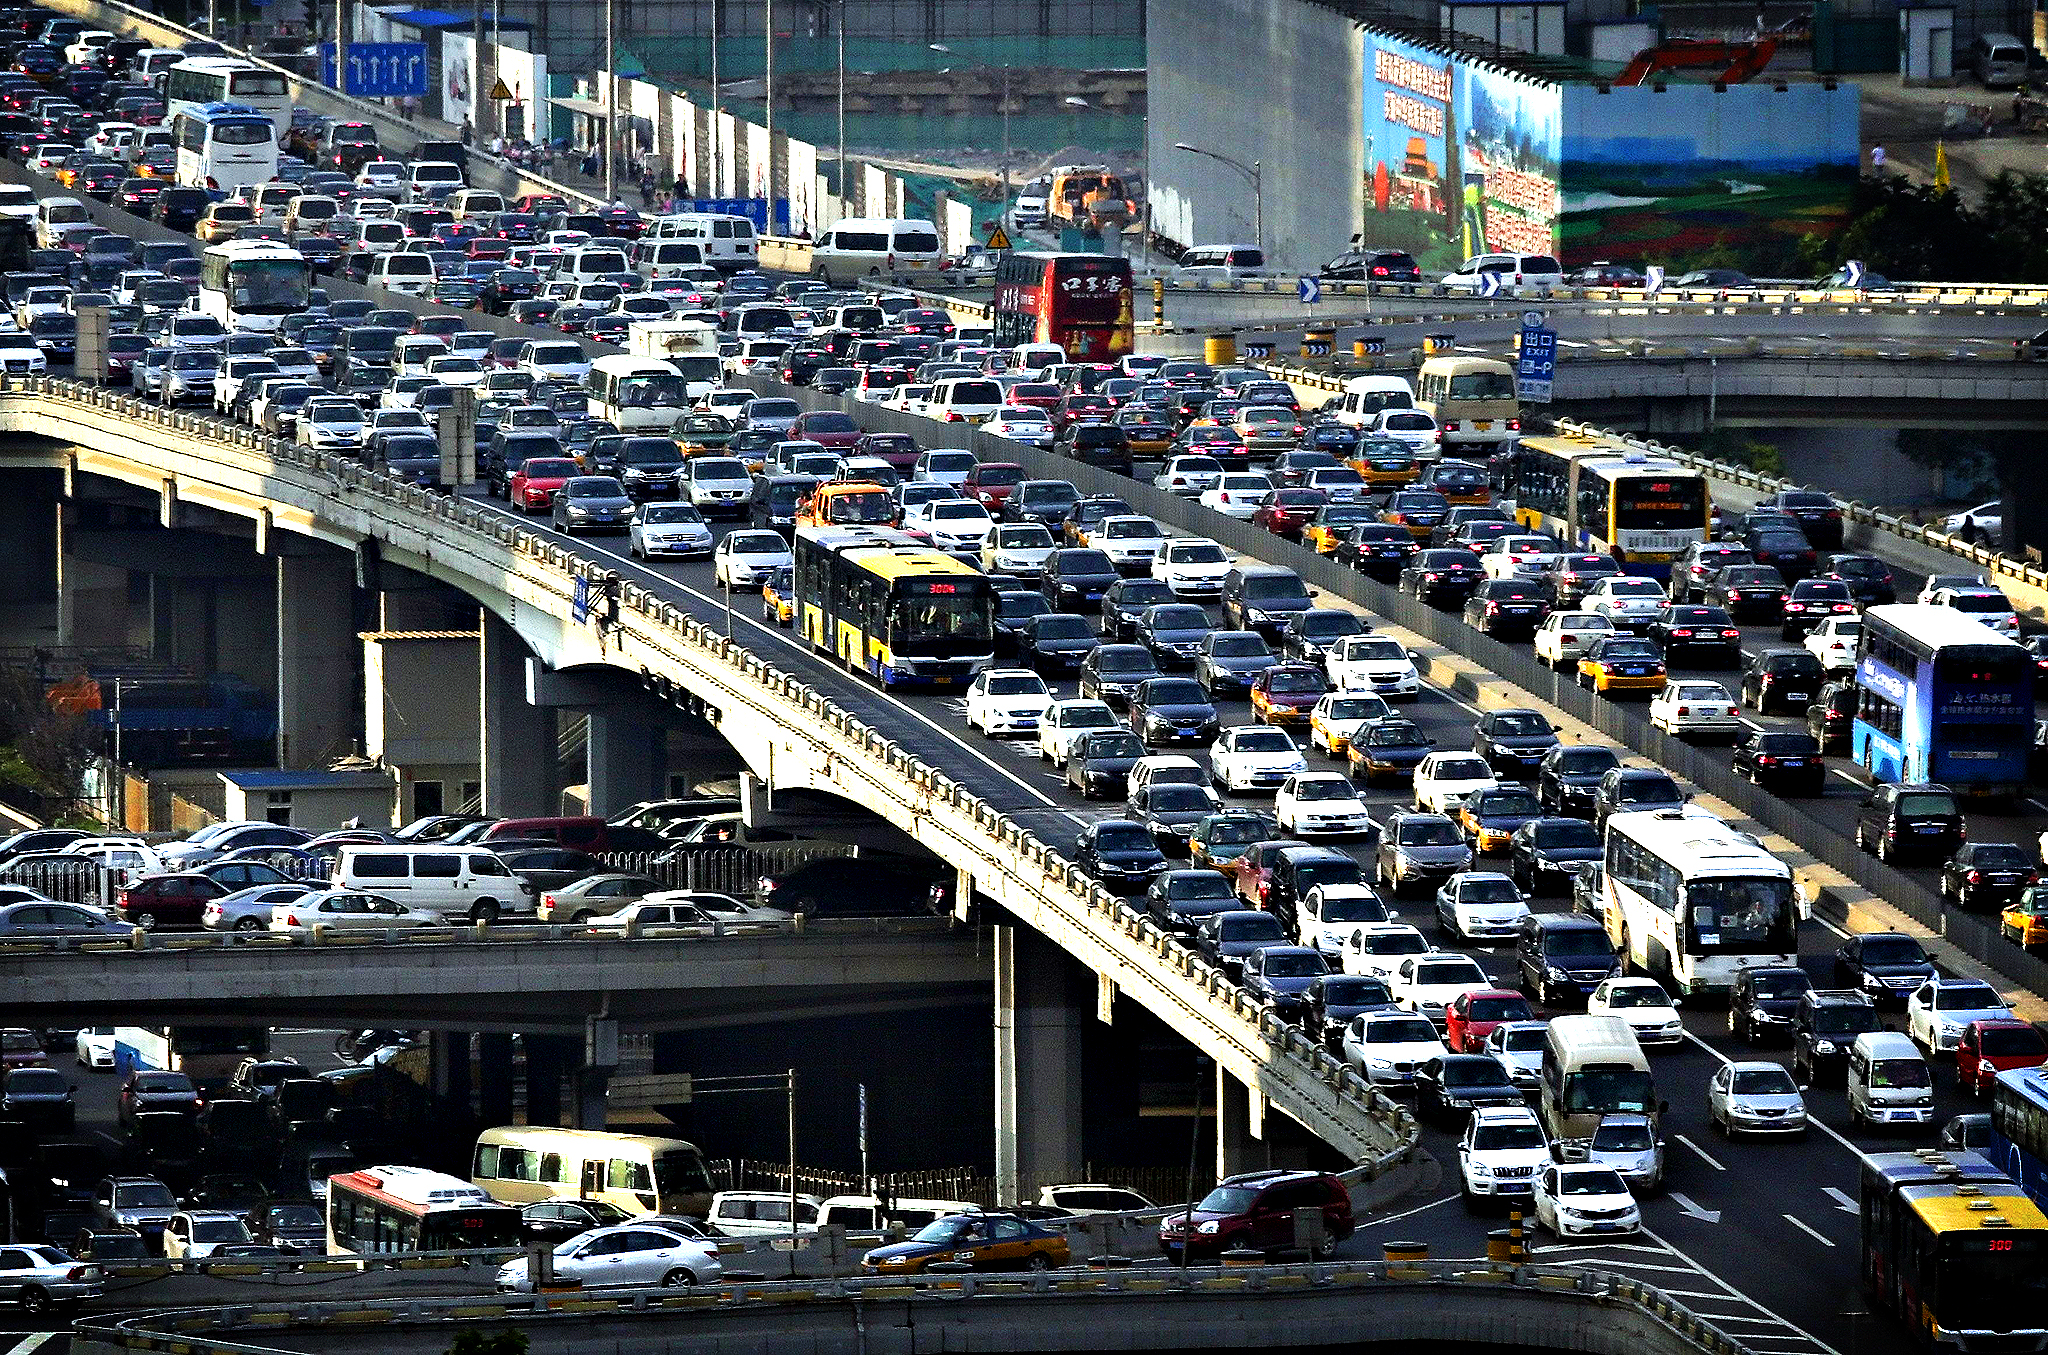 Lines of cars are pictured during a rush hour traffic jam on Guo